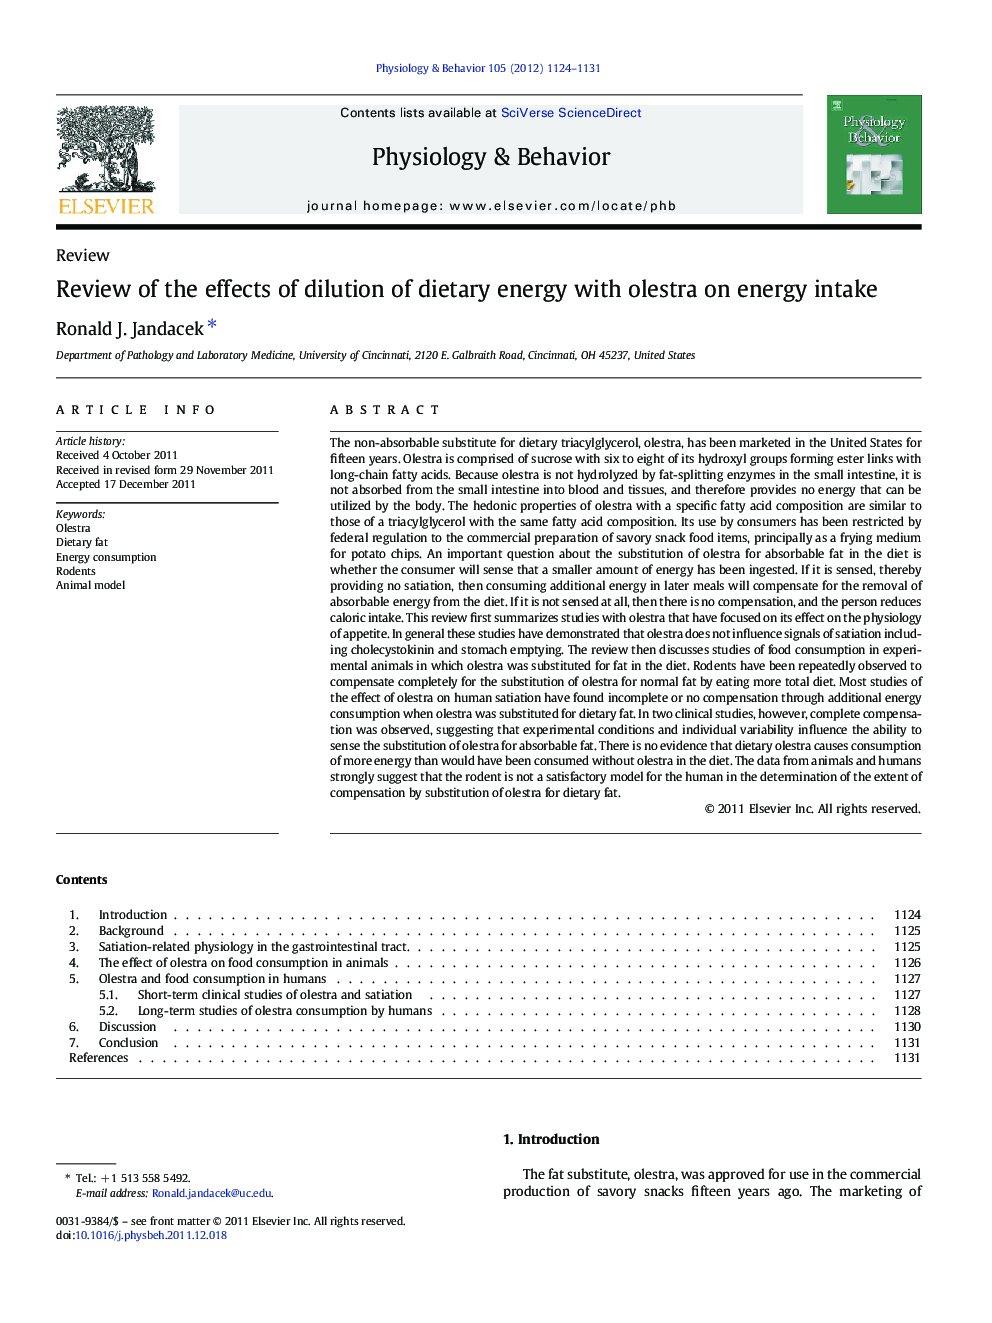 Review of the effects of dilution of dietary energy with olestra on energy intake